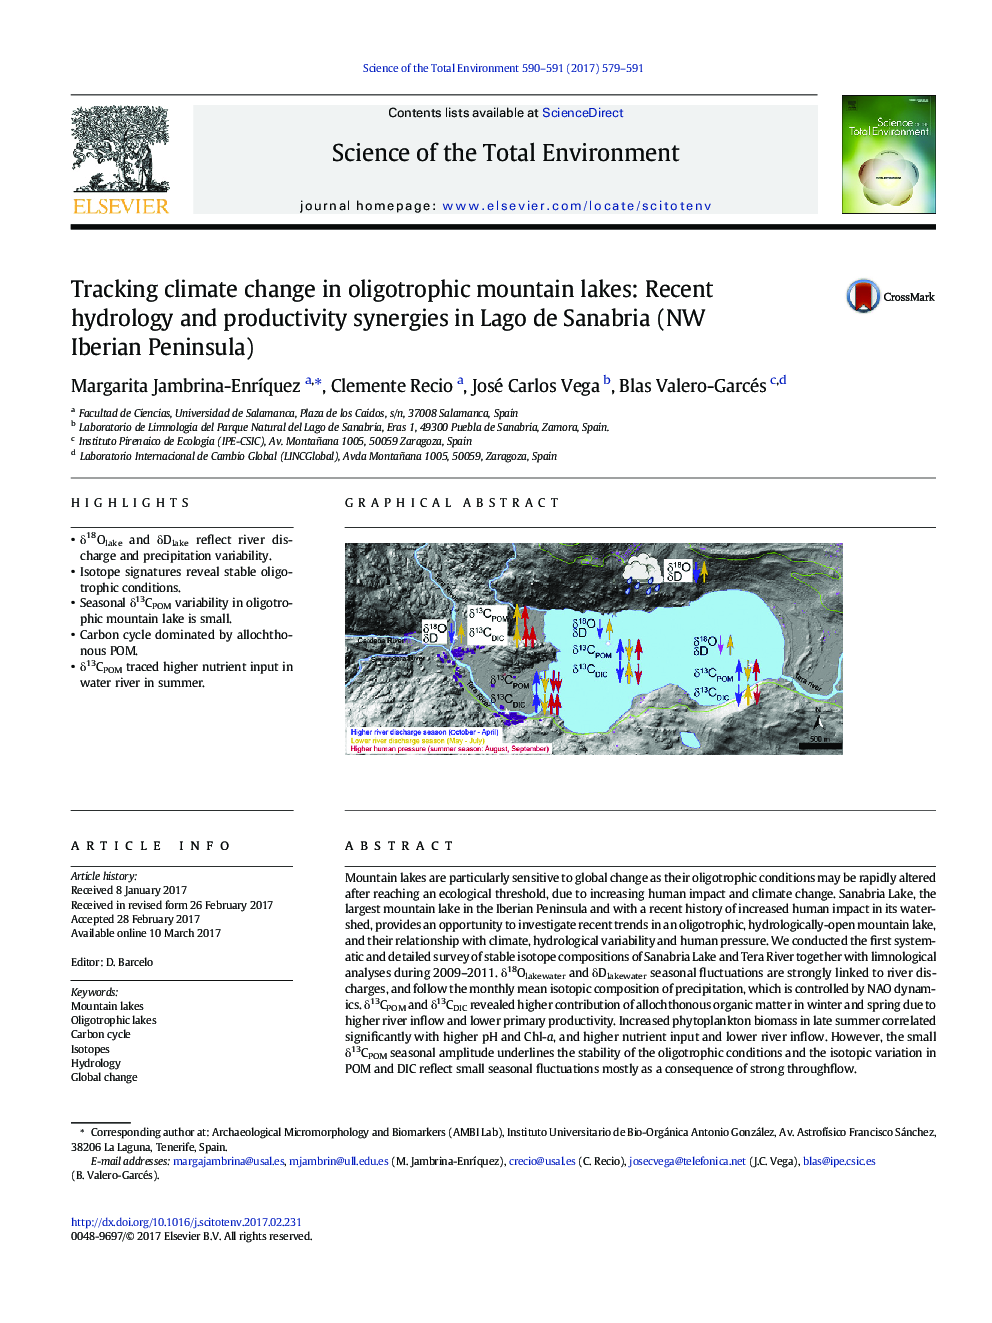 Tracking climate change in oligotrophic mountain lakes: Recent hydrology and productivity synergies in Lago de Sanabria (NW Iberian Peninsula)